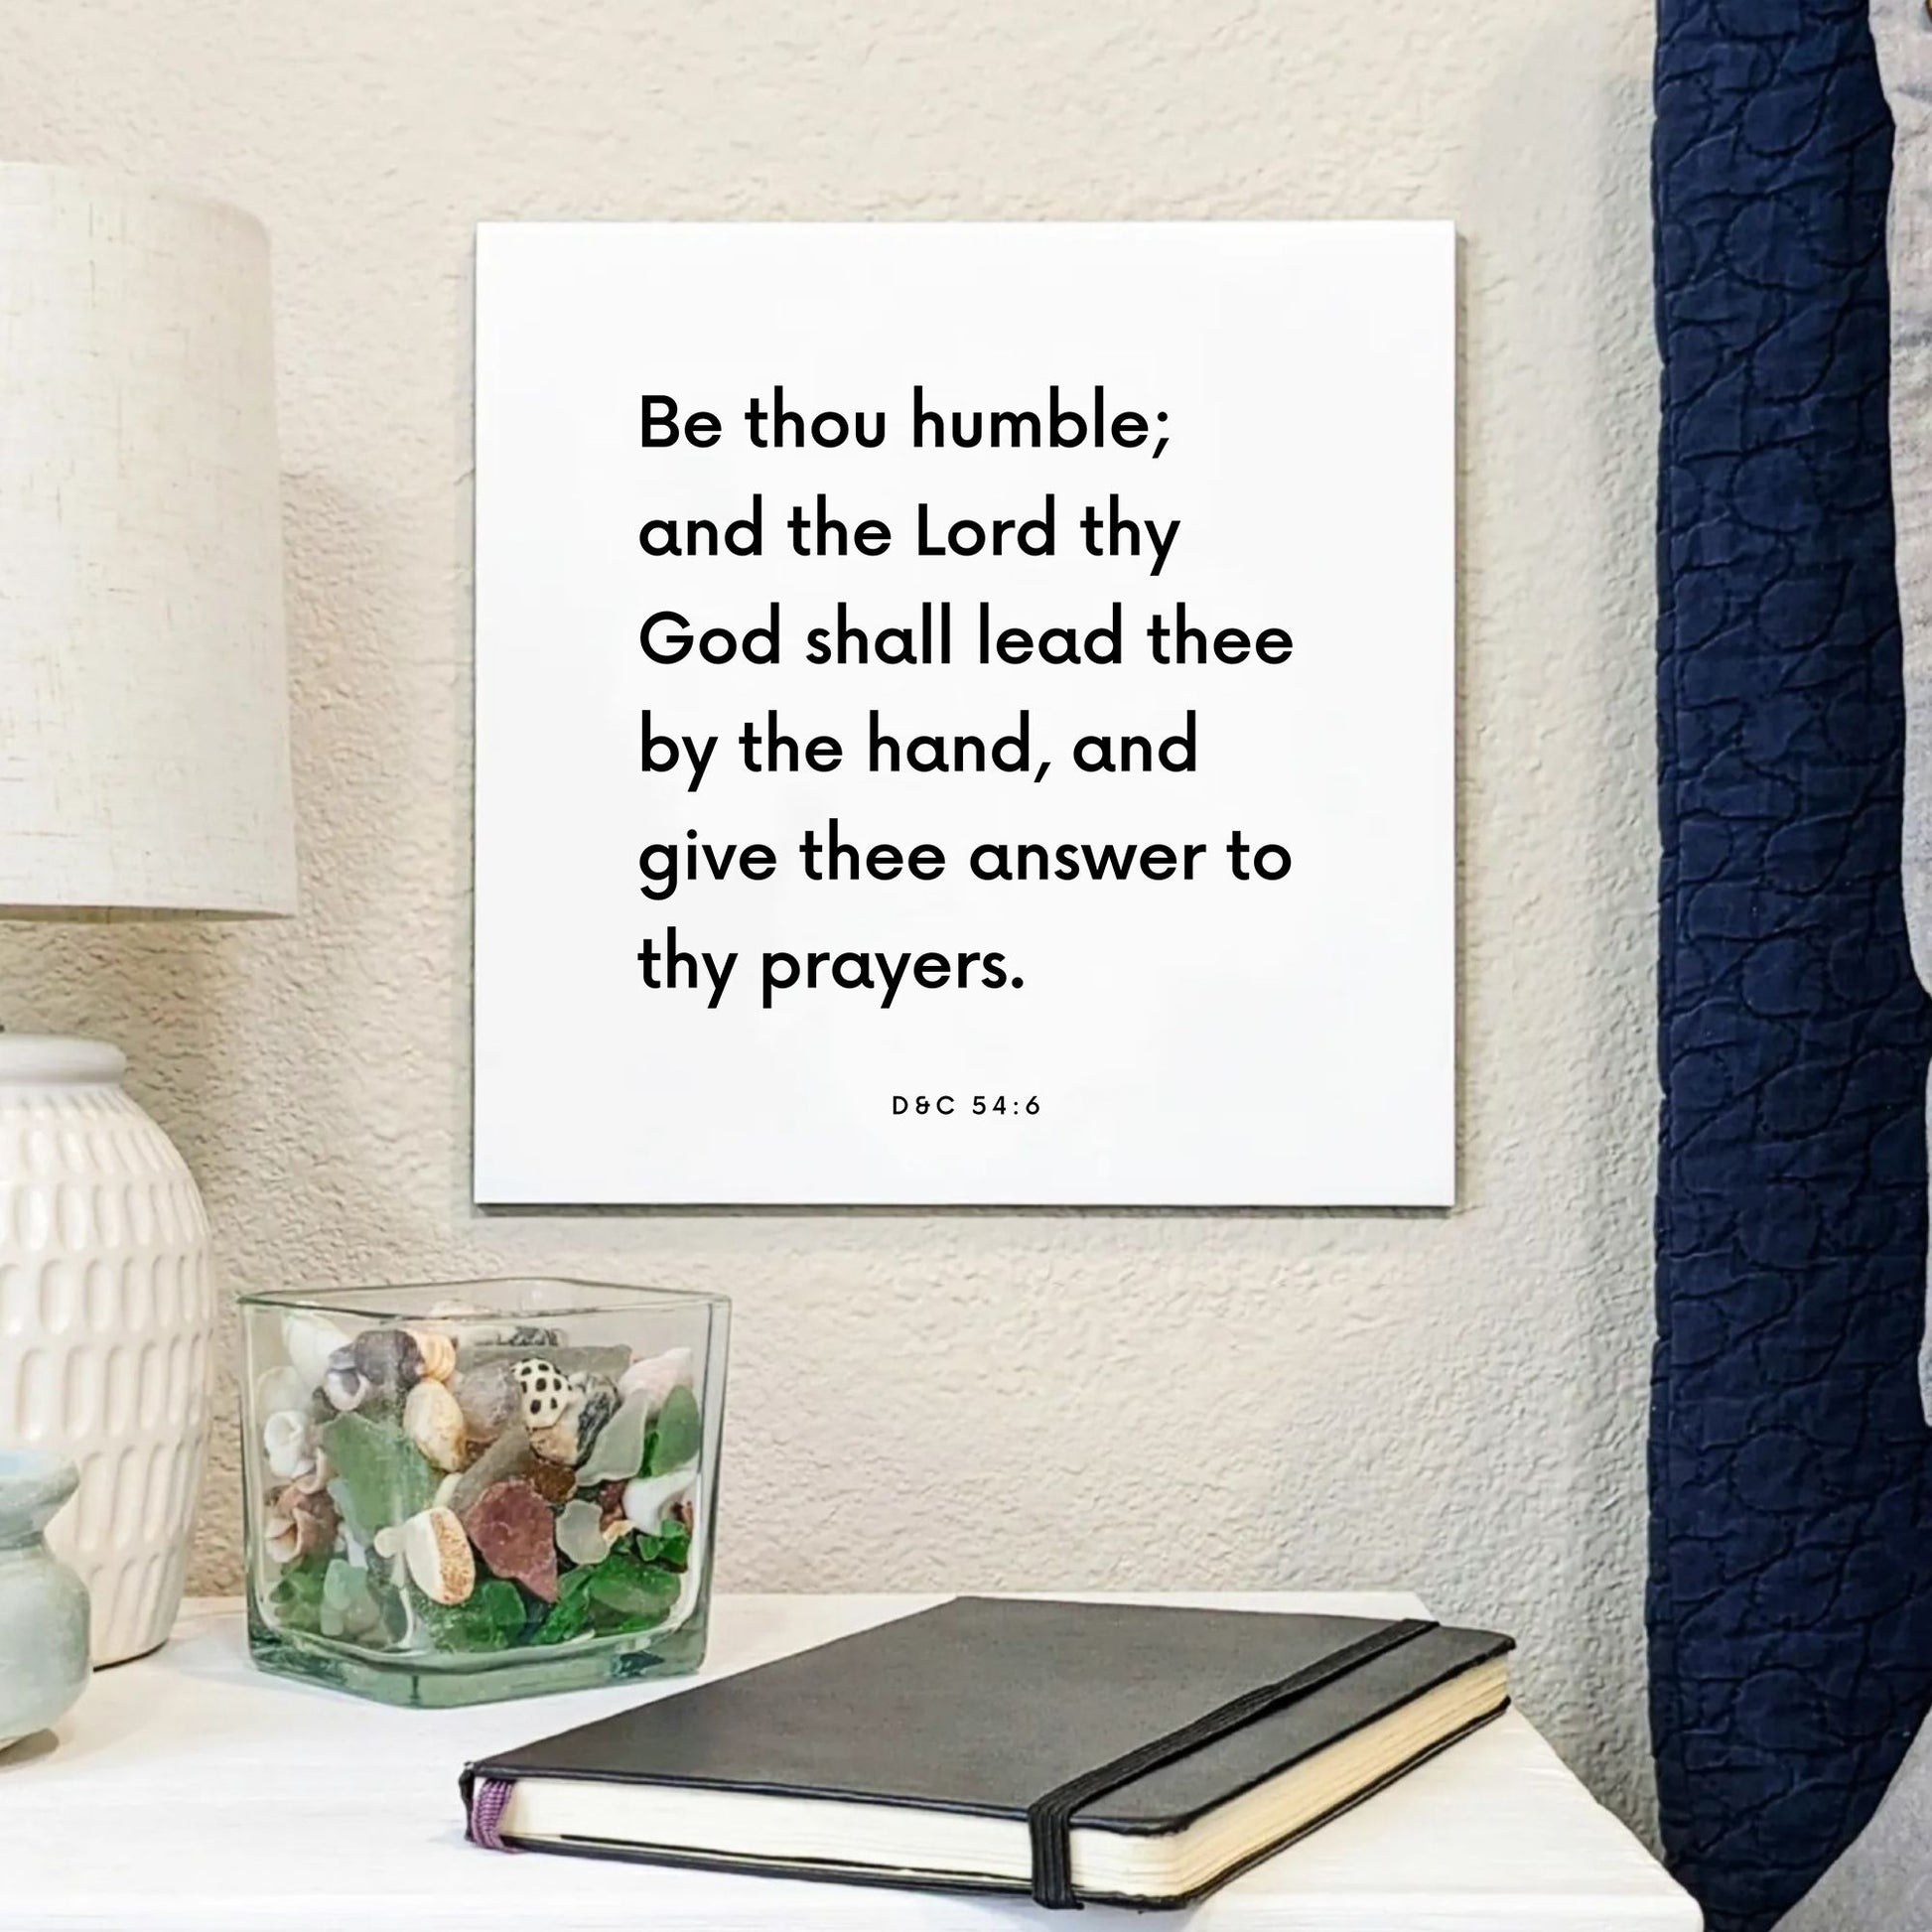 Bedside mouting of the scripture tile for D&C 112:10 - "Be thou humble; and the Lord thy God shall lead thee"